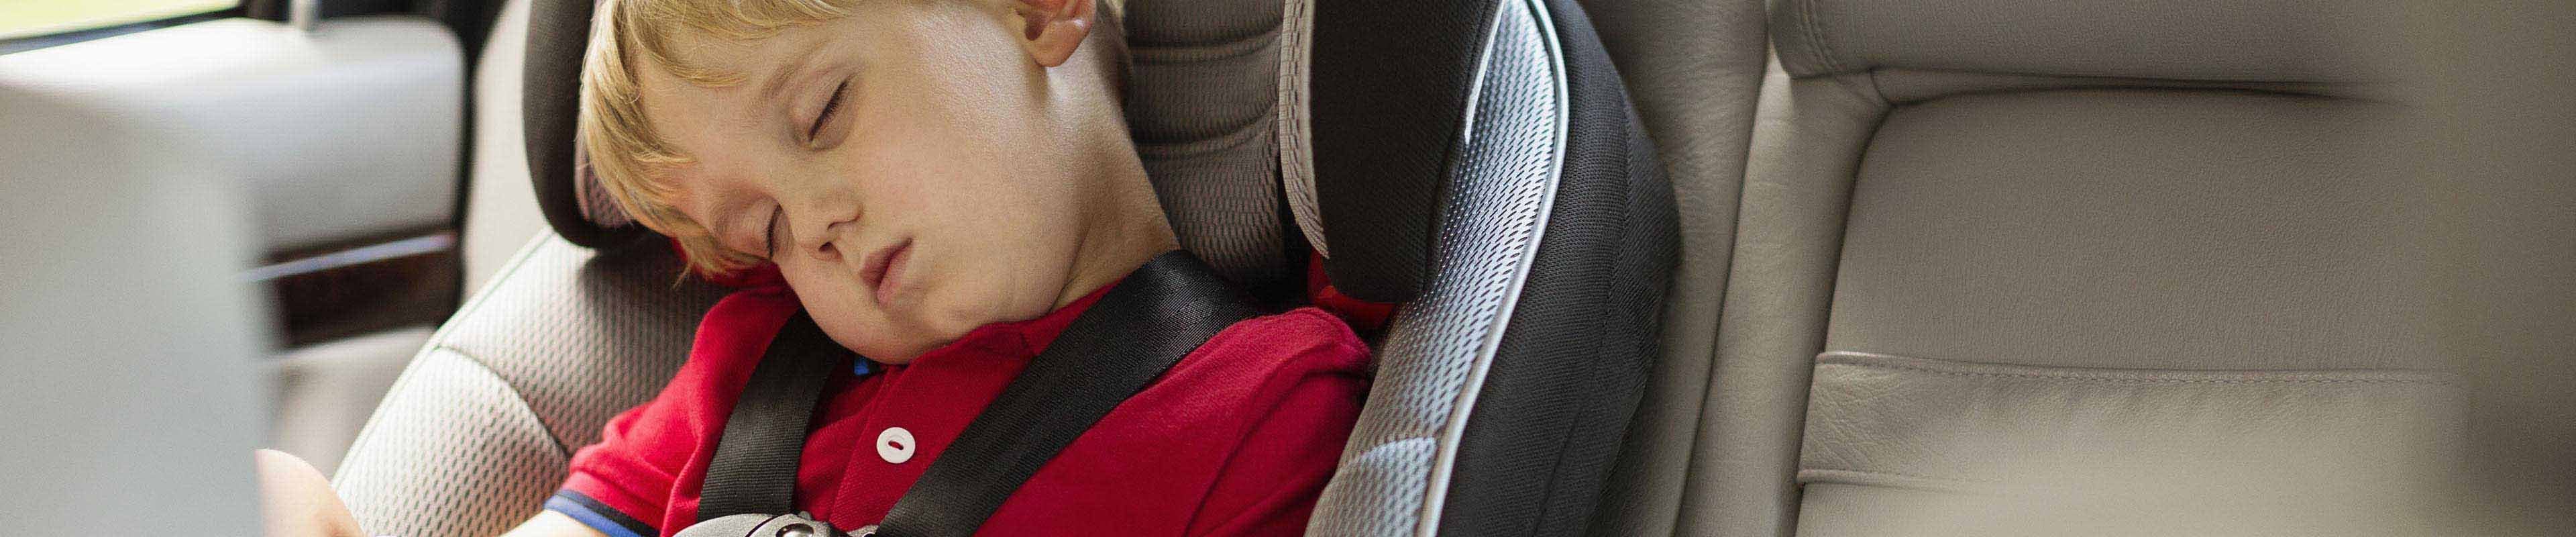 6 Tips for Buying a Car Seat